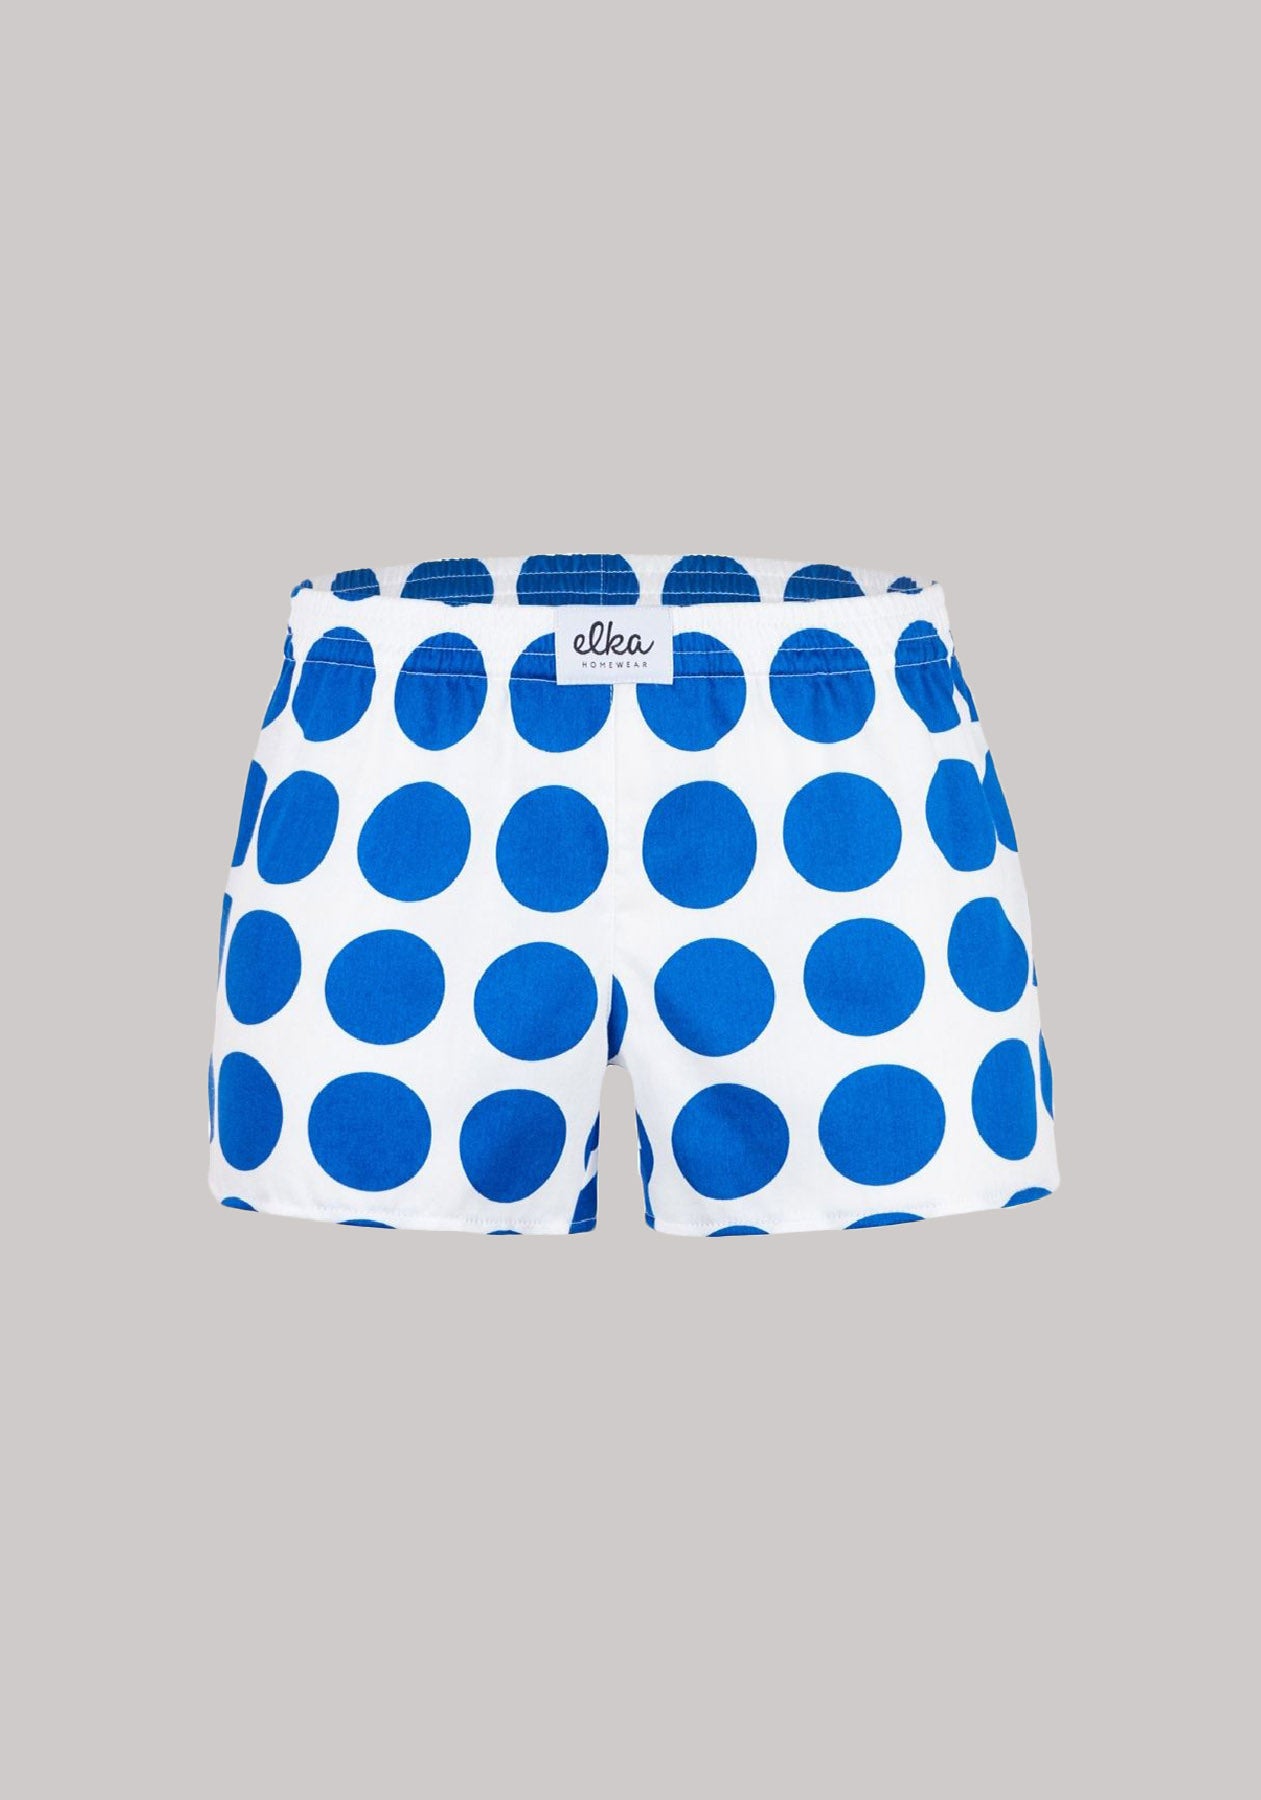 Women's shorts White with blue polka dots